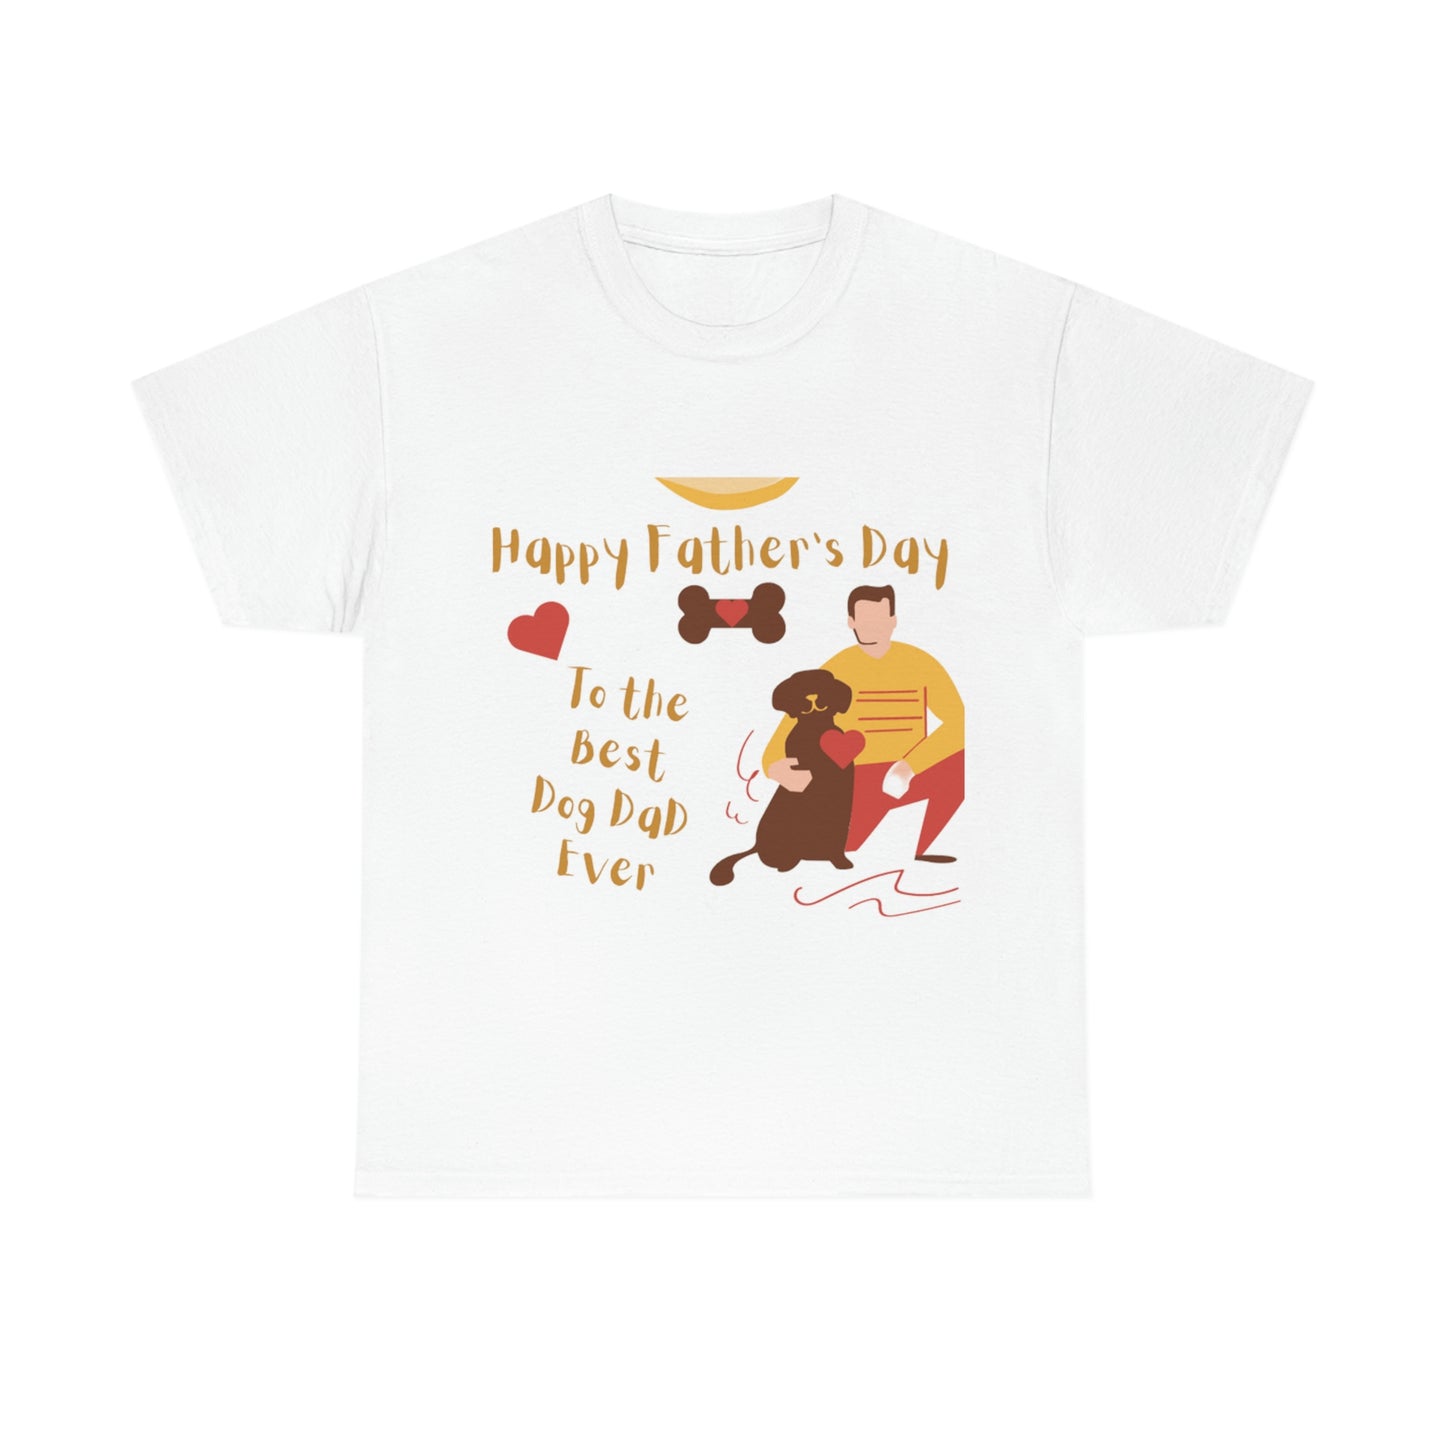 Father's Day T-shirt for Dog Dads